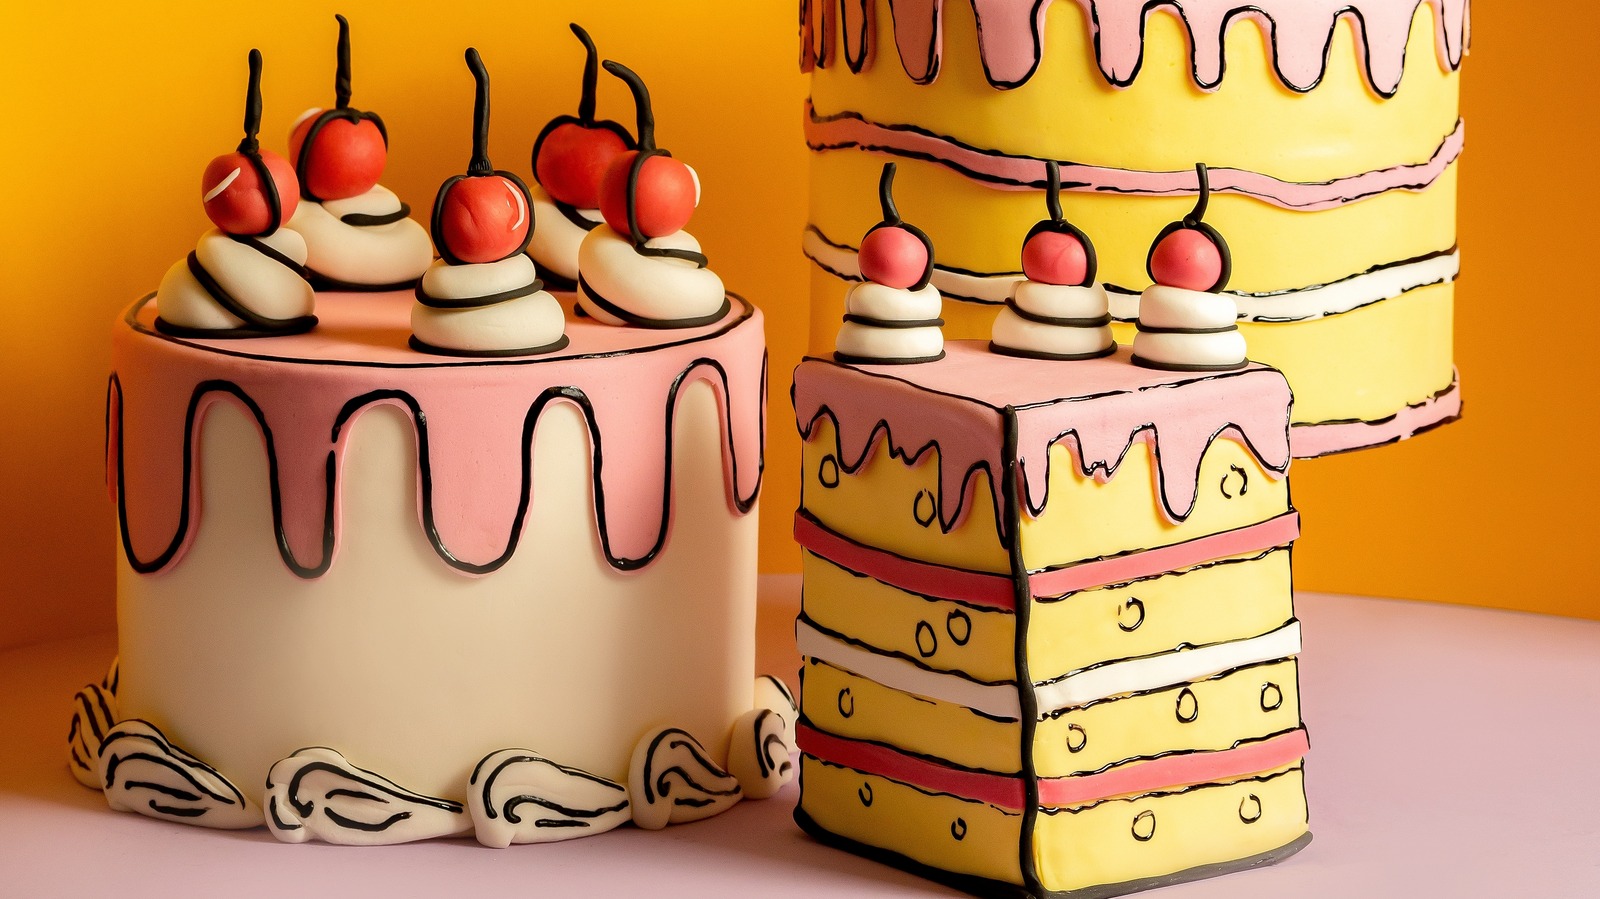 This cartoon cake is actually real, but try telling that to your brain - 4CA